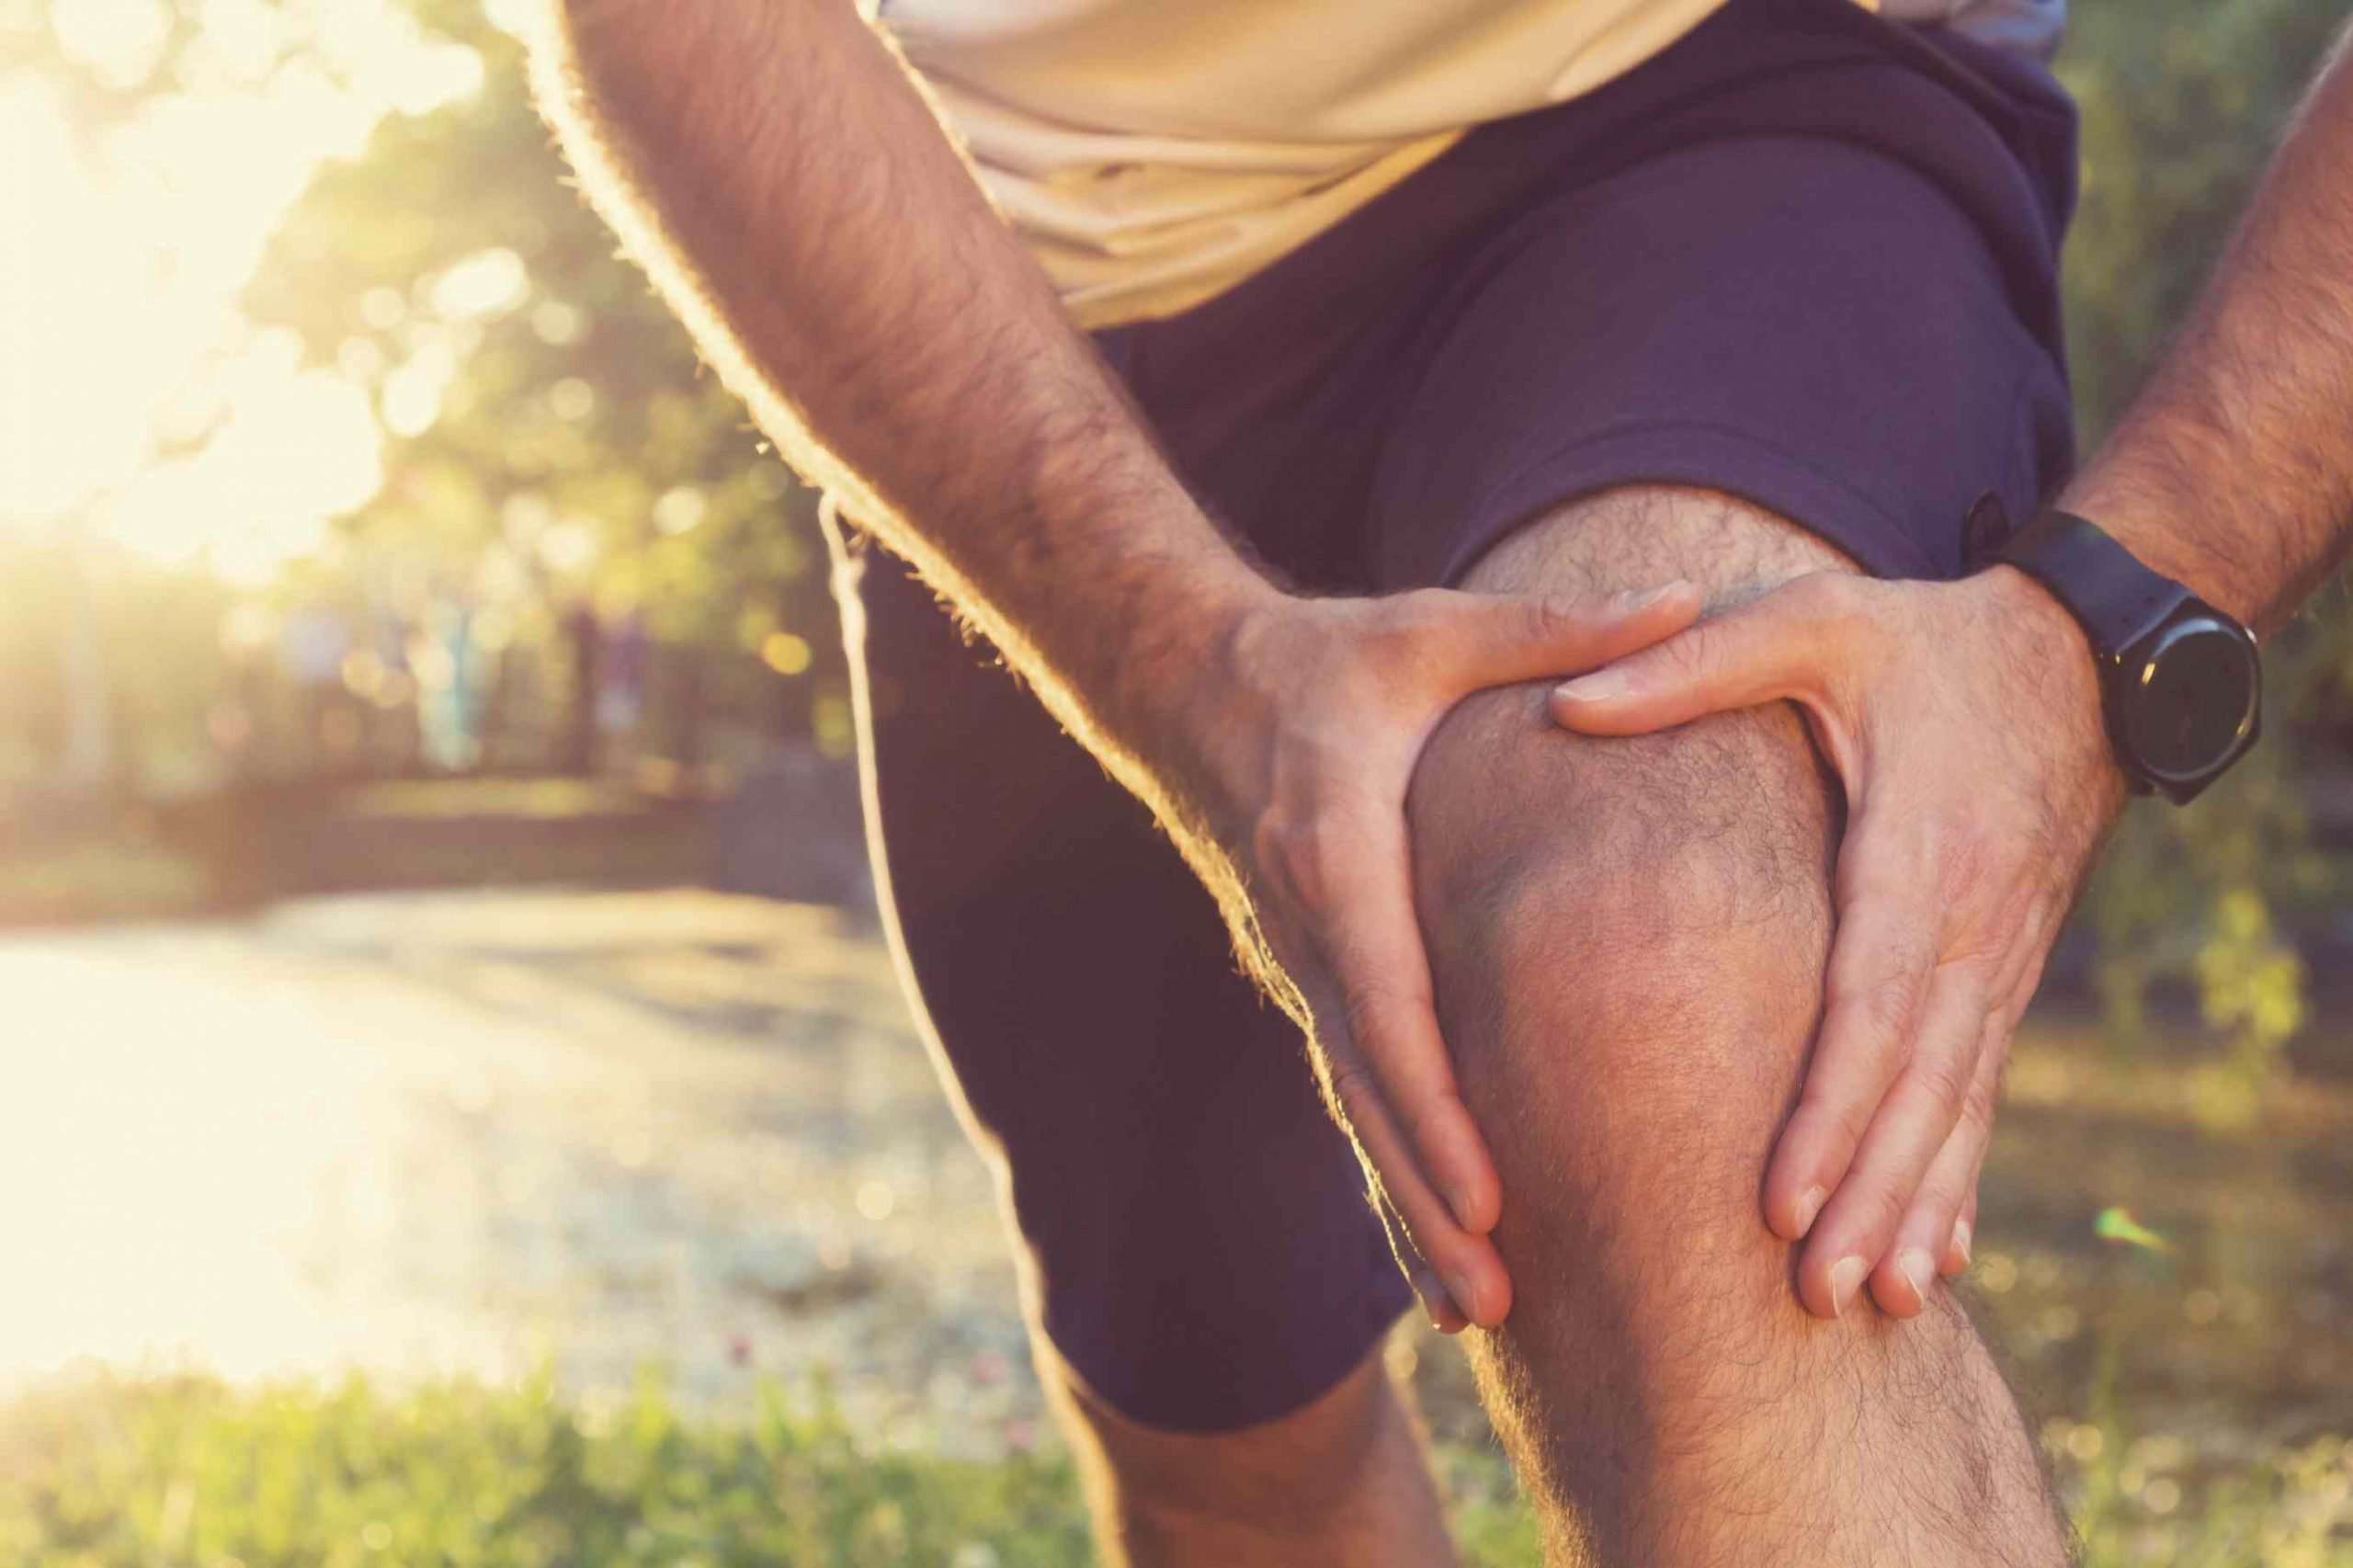 Knee Pain May Be the First Sign of Lung Cancer